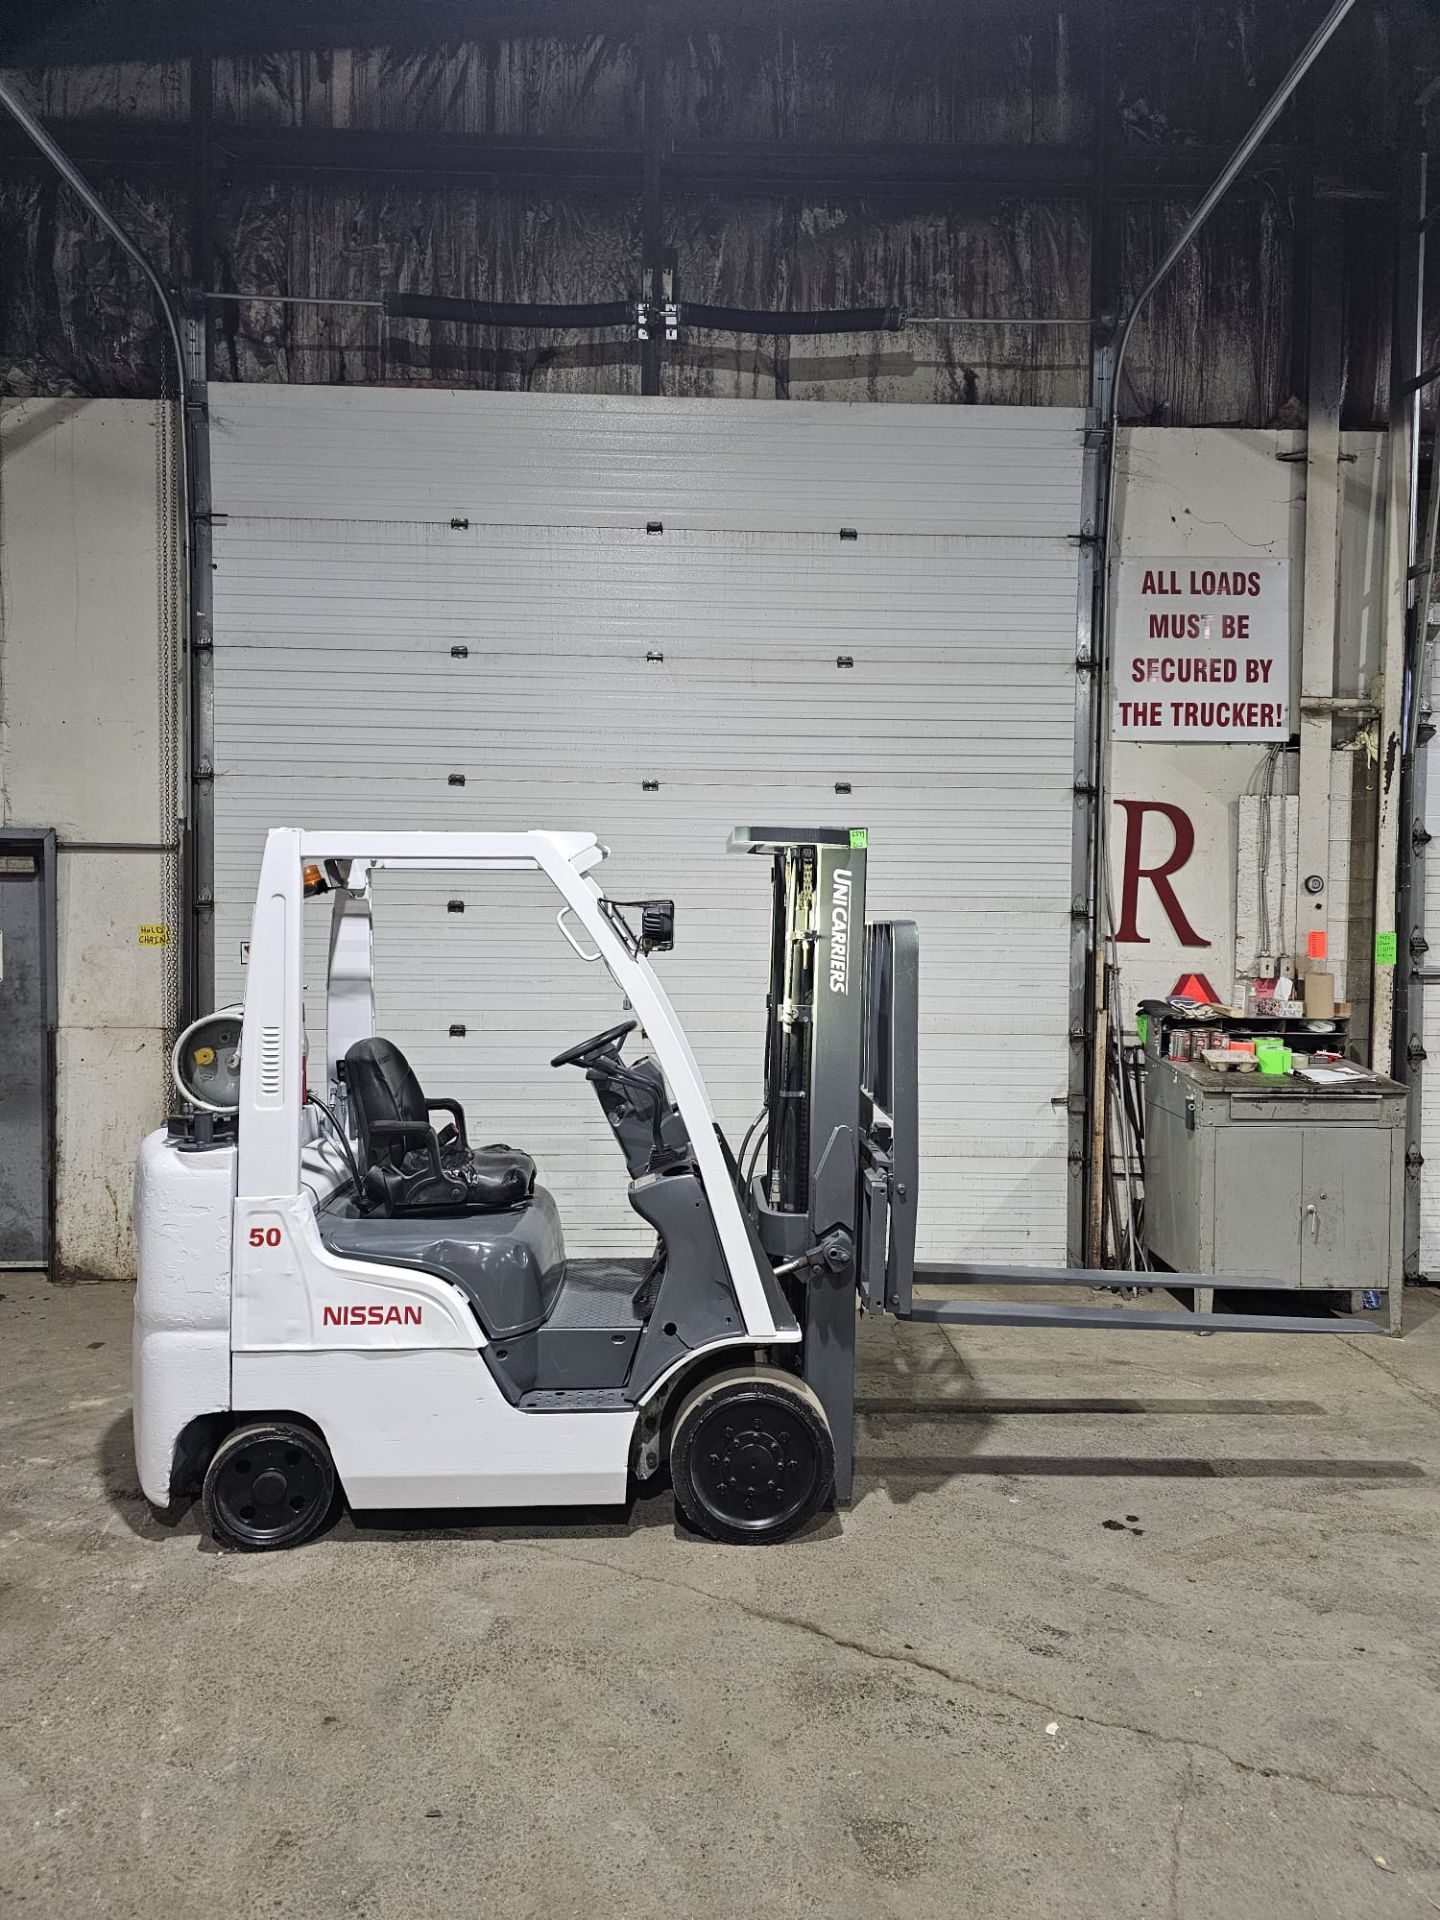 2015 Nissan 5000lbs Capacity LPG (Propane) Forklift 3-STAGE MAST with sideshift (no propane tank